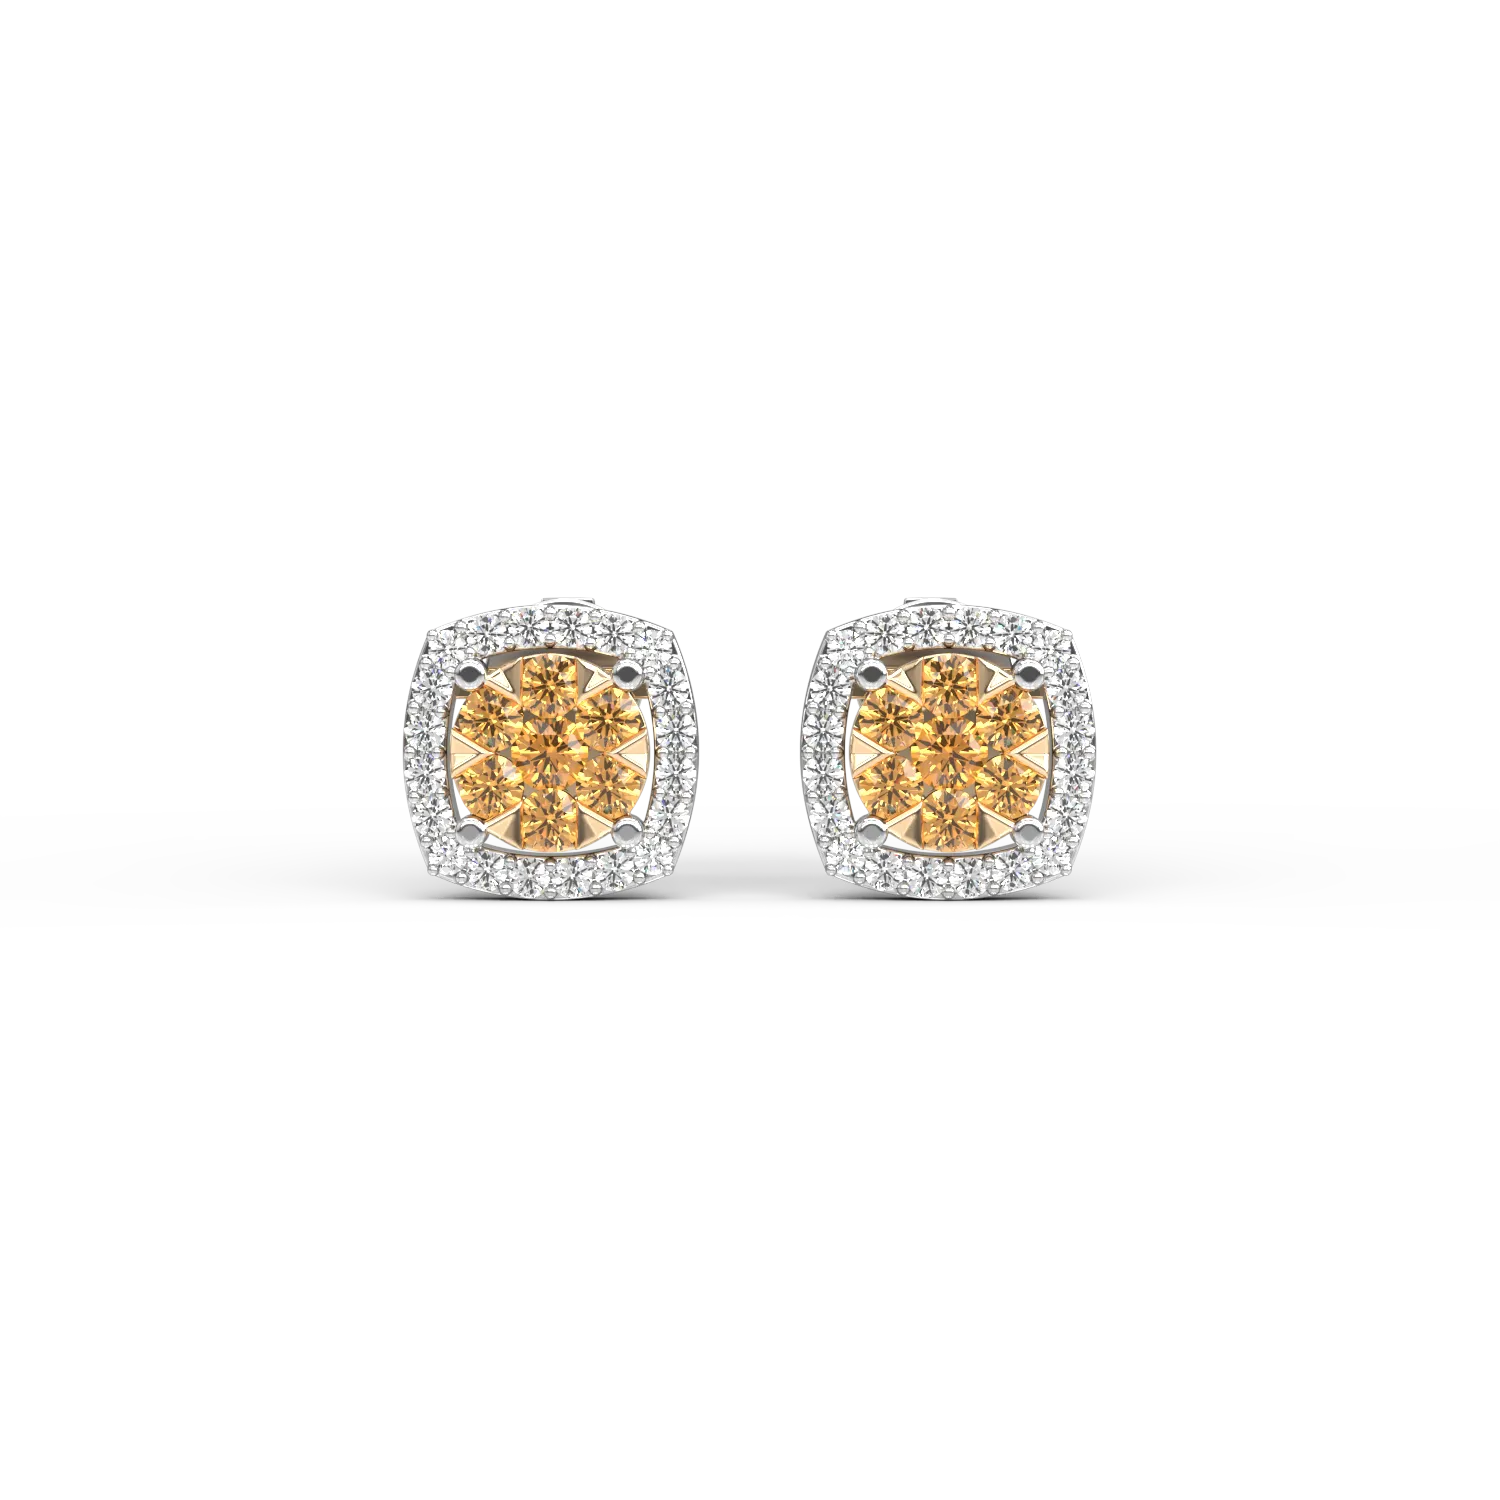 14K white/yellow gold earrings with 0.314ct fancy diamond and 0.137ct diamonds